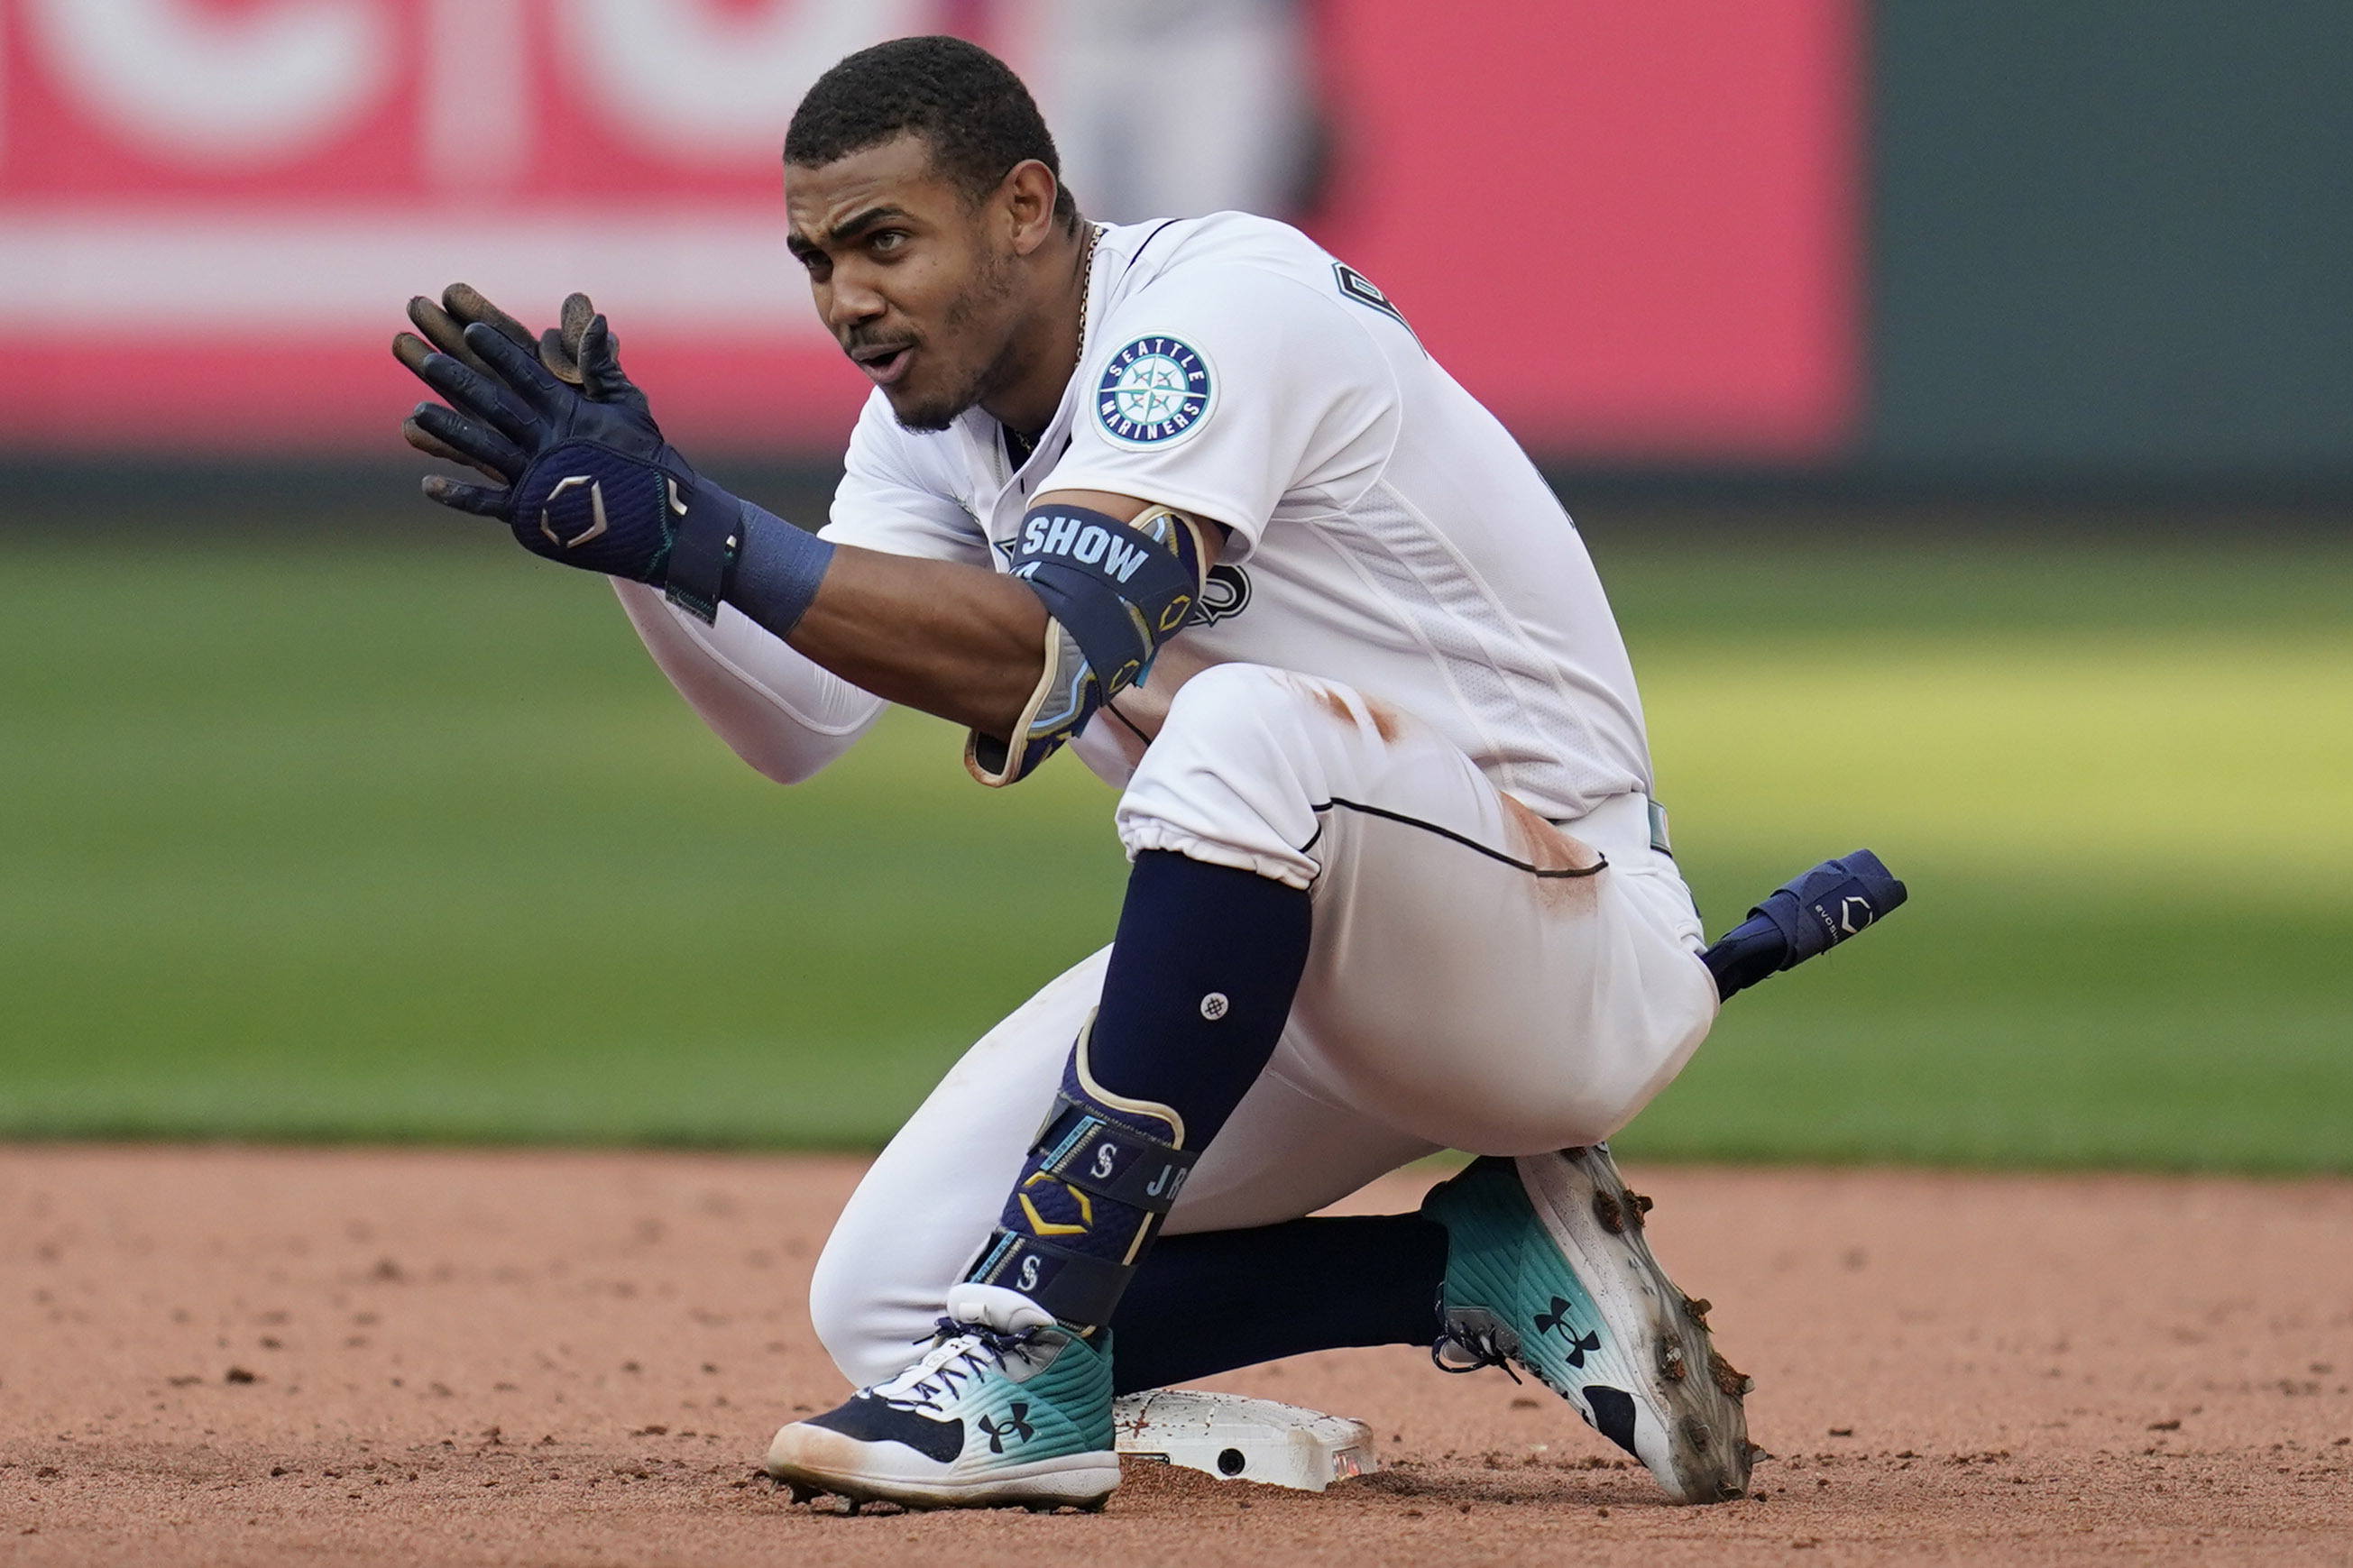 Mariners' Julio Rodríguez, Braves' Michael Harris II Win Rookie Of The Year  Awards - Fastball